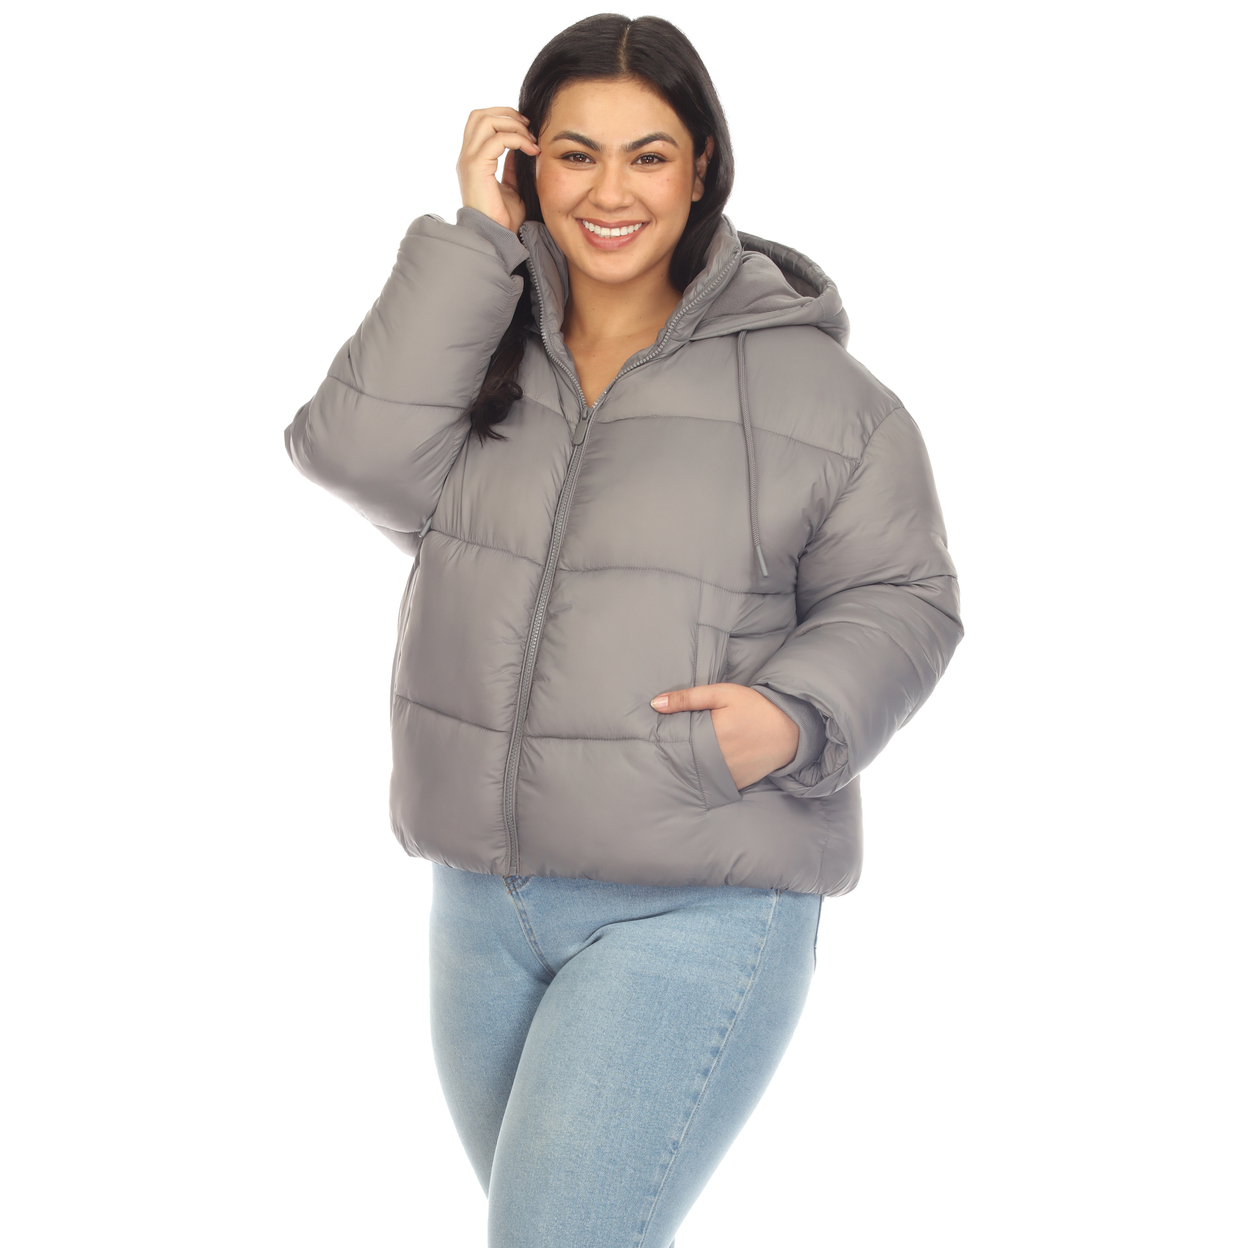 White Mark Women's Zip Hooded Puffer Jacket With Pockets - Gray, 2x